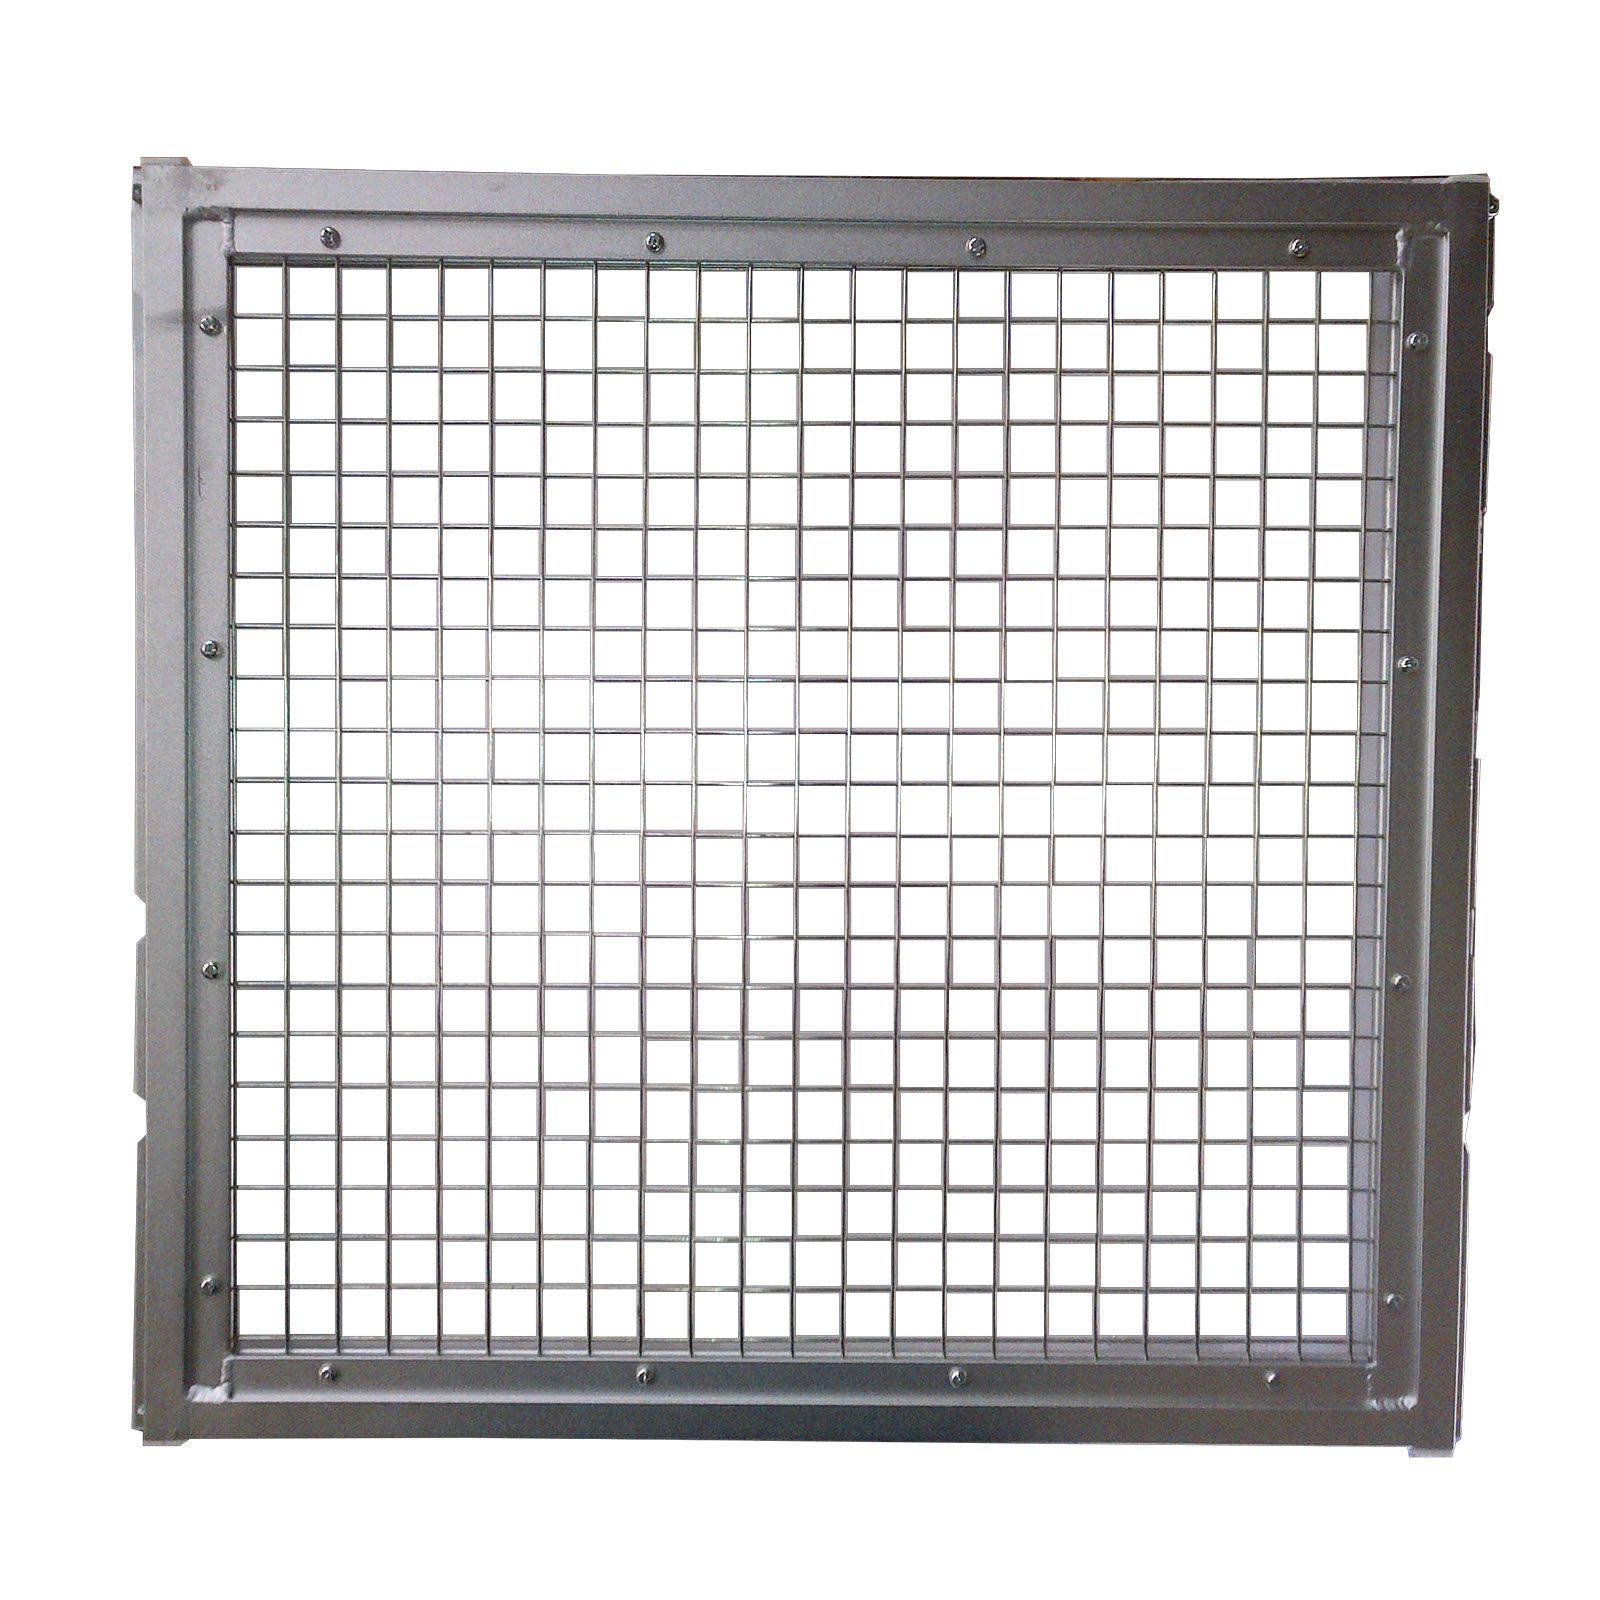 PROTECTION NET 75T product photo